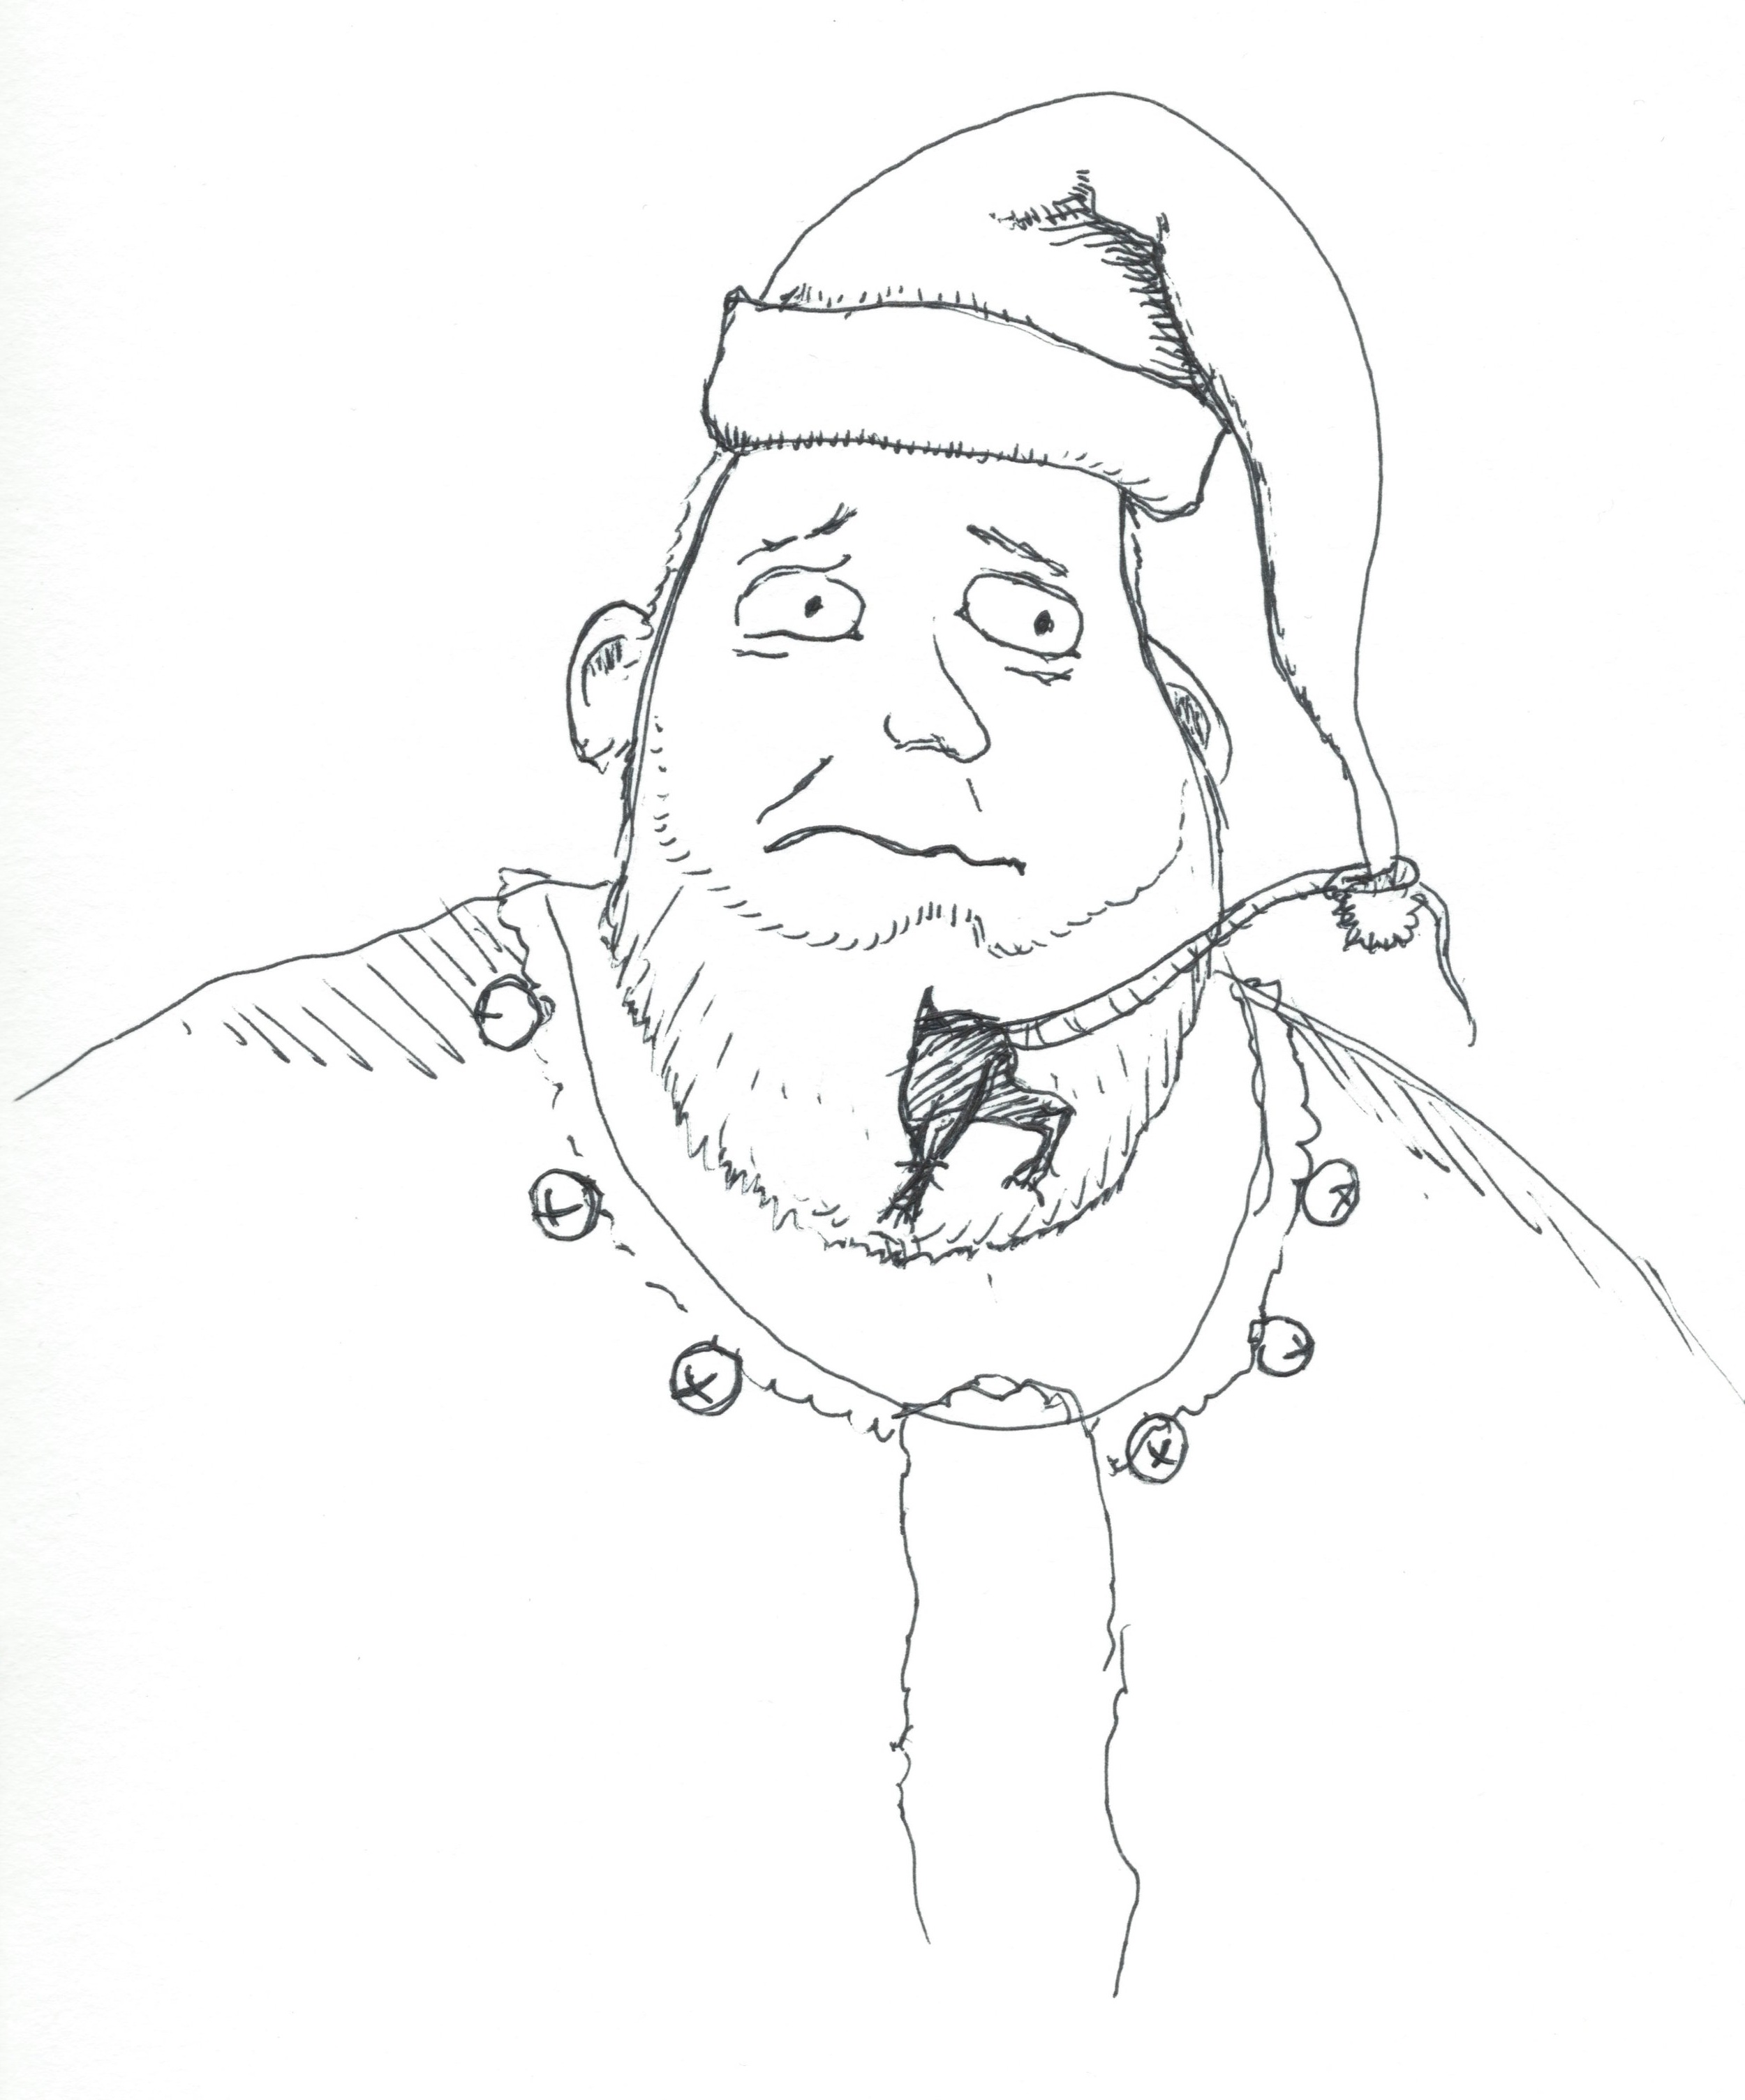 Rat Kringle, 2013. Ink on paper, 9 x 12 inches.